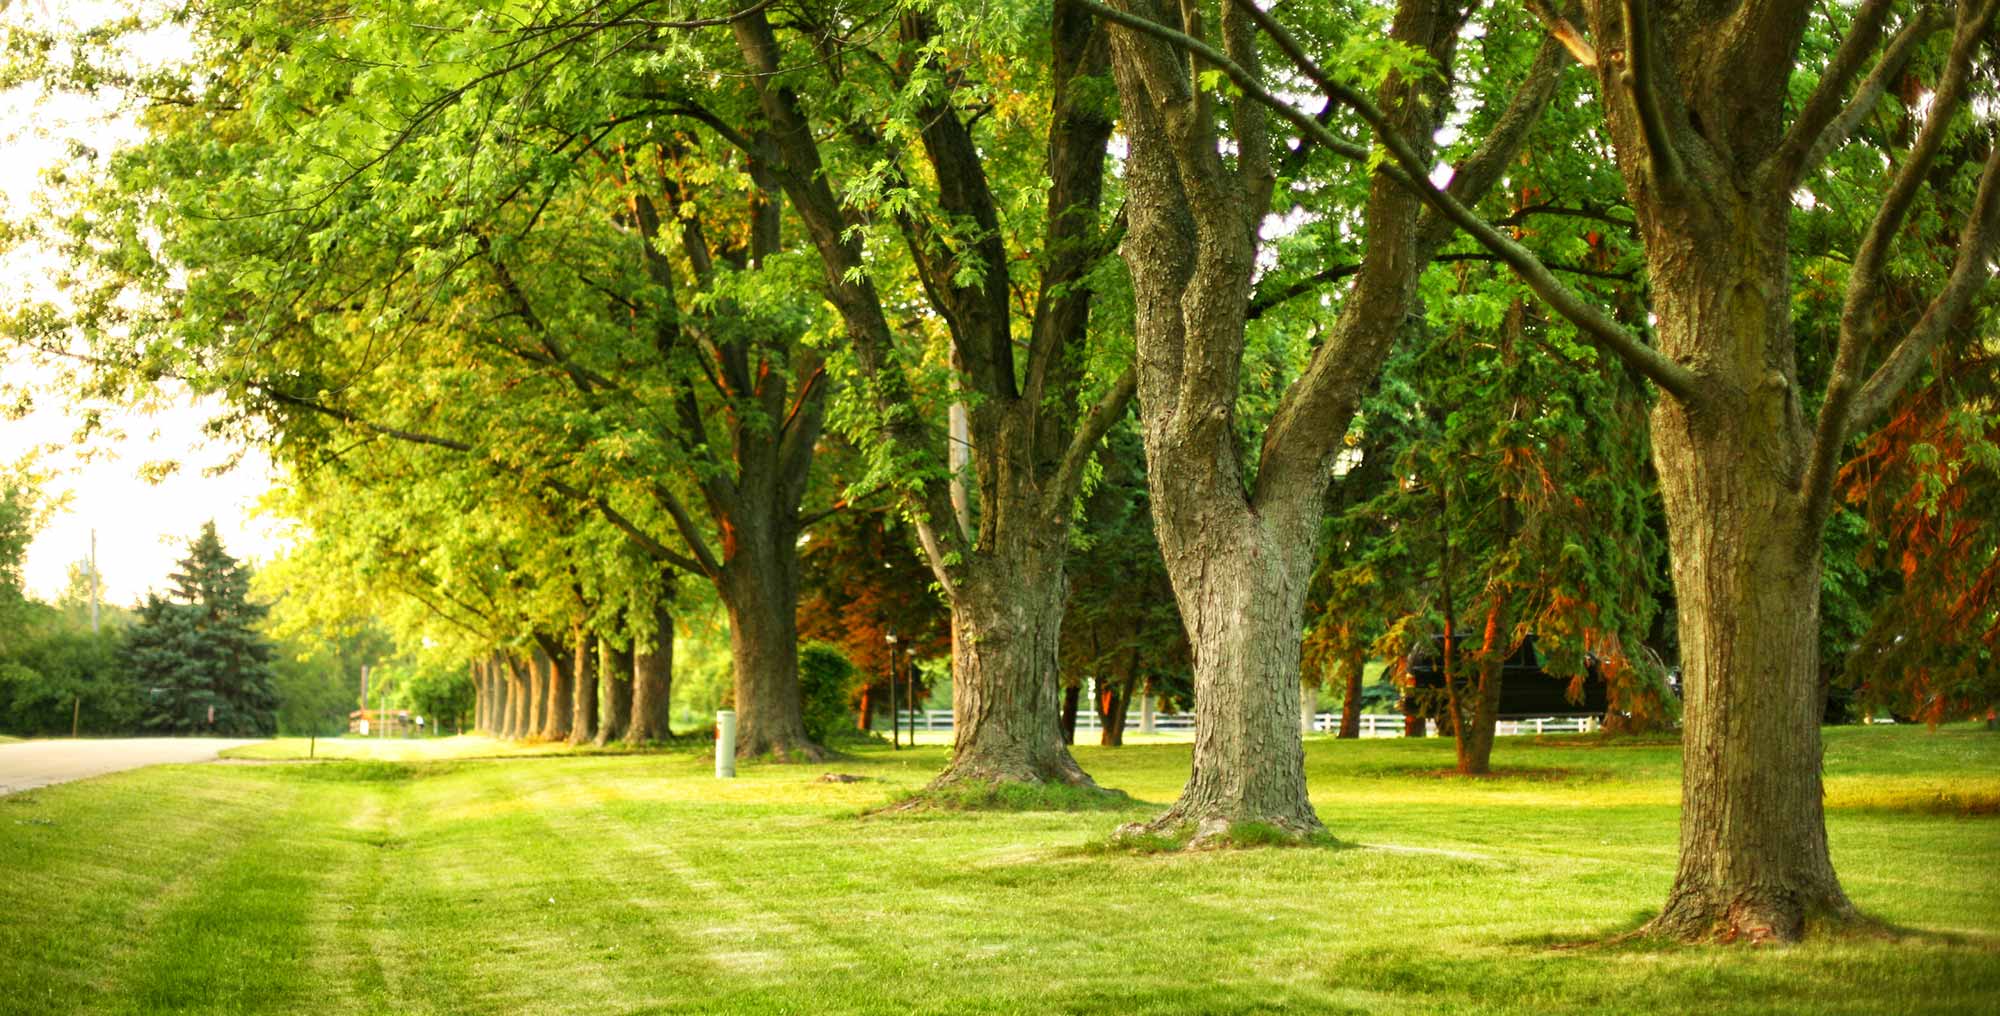 Tree Removal Service in Green Bay | Monster Tree Service